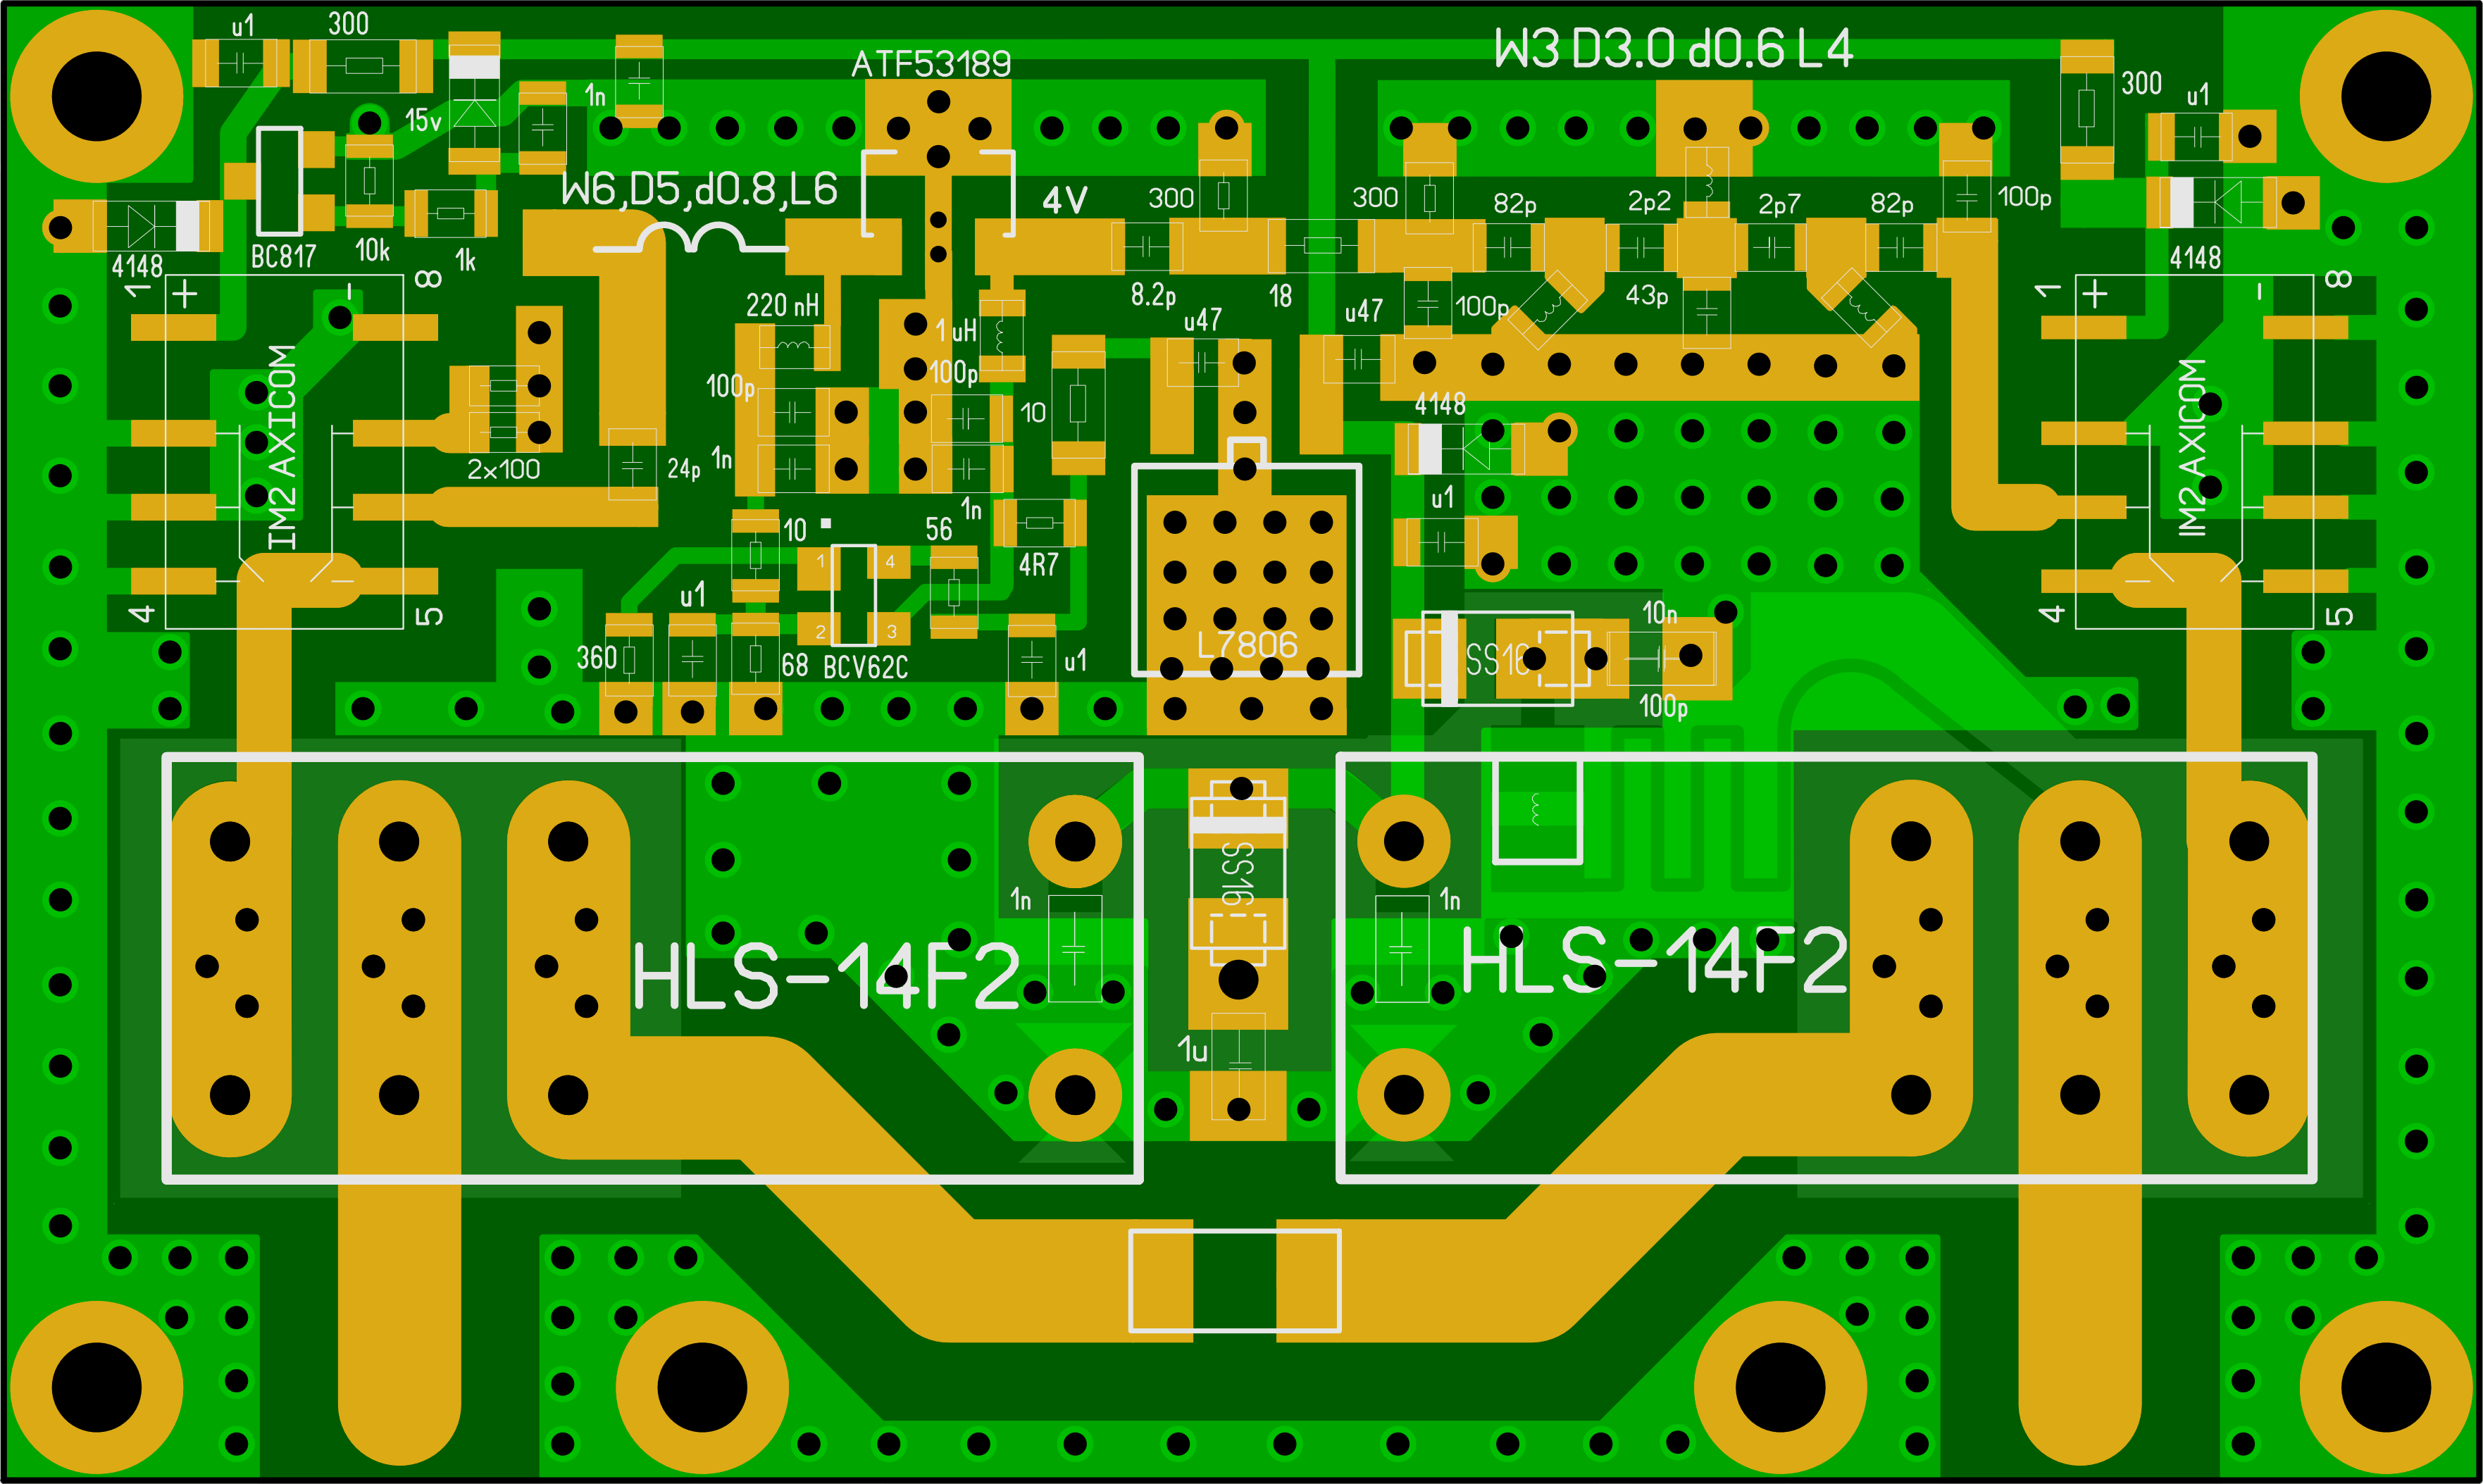 LNA 2m QRO layout revision from 2020-10-02